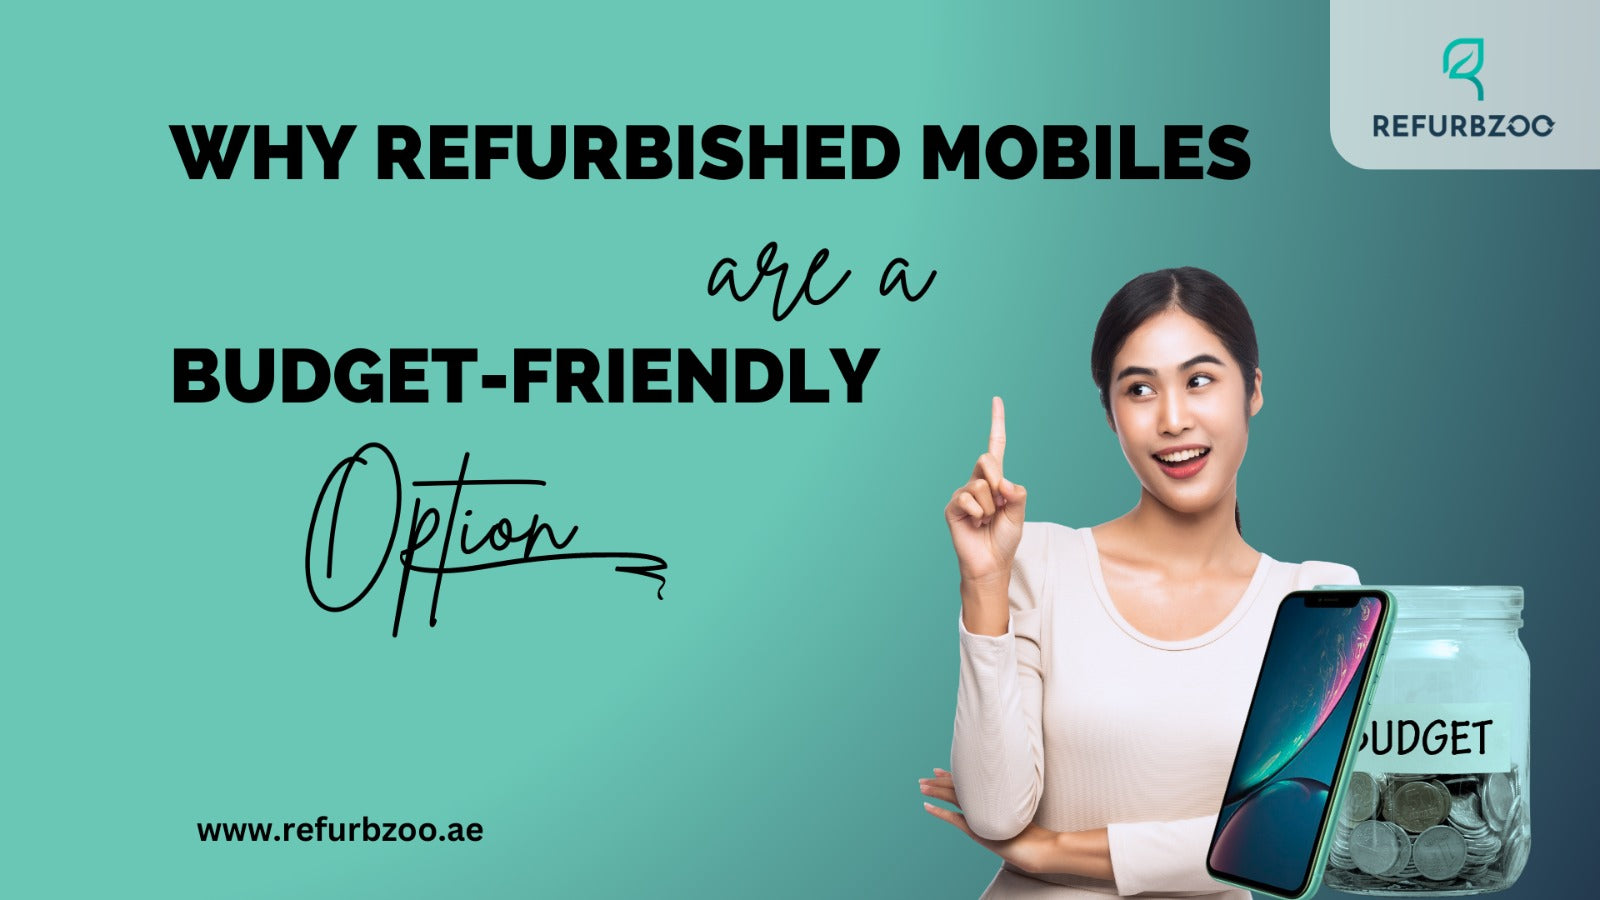 Why Refurbished Mobiles are a Budget-Friendly Option